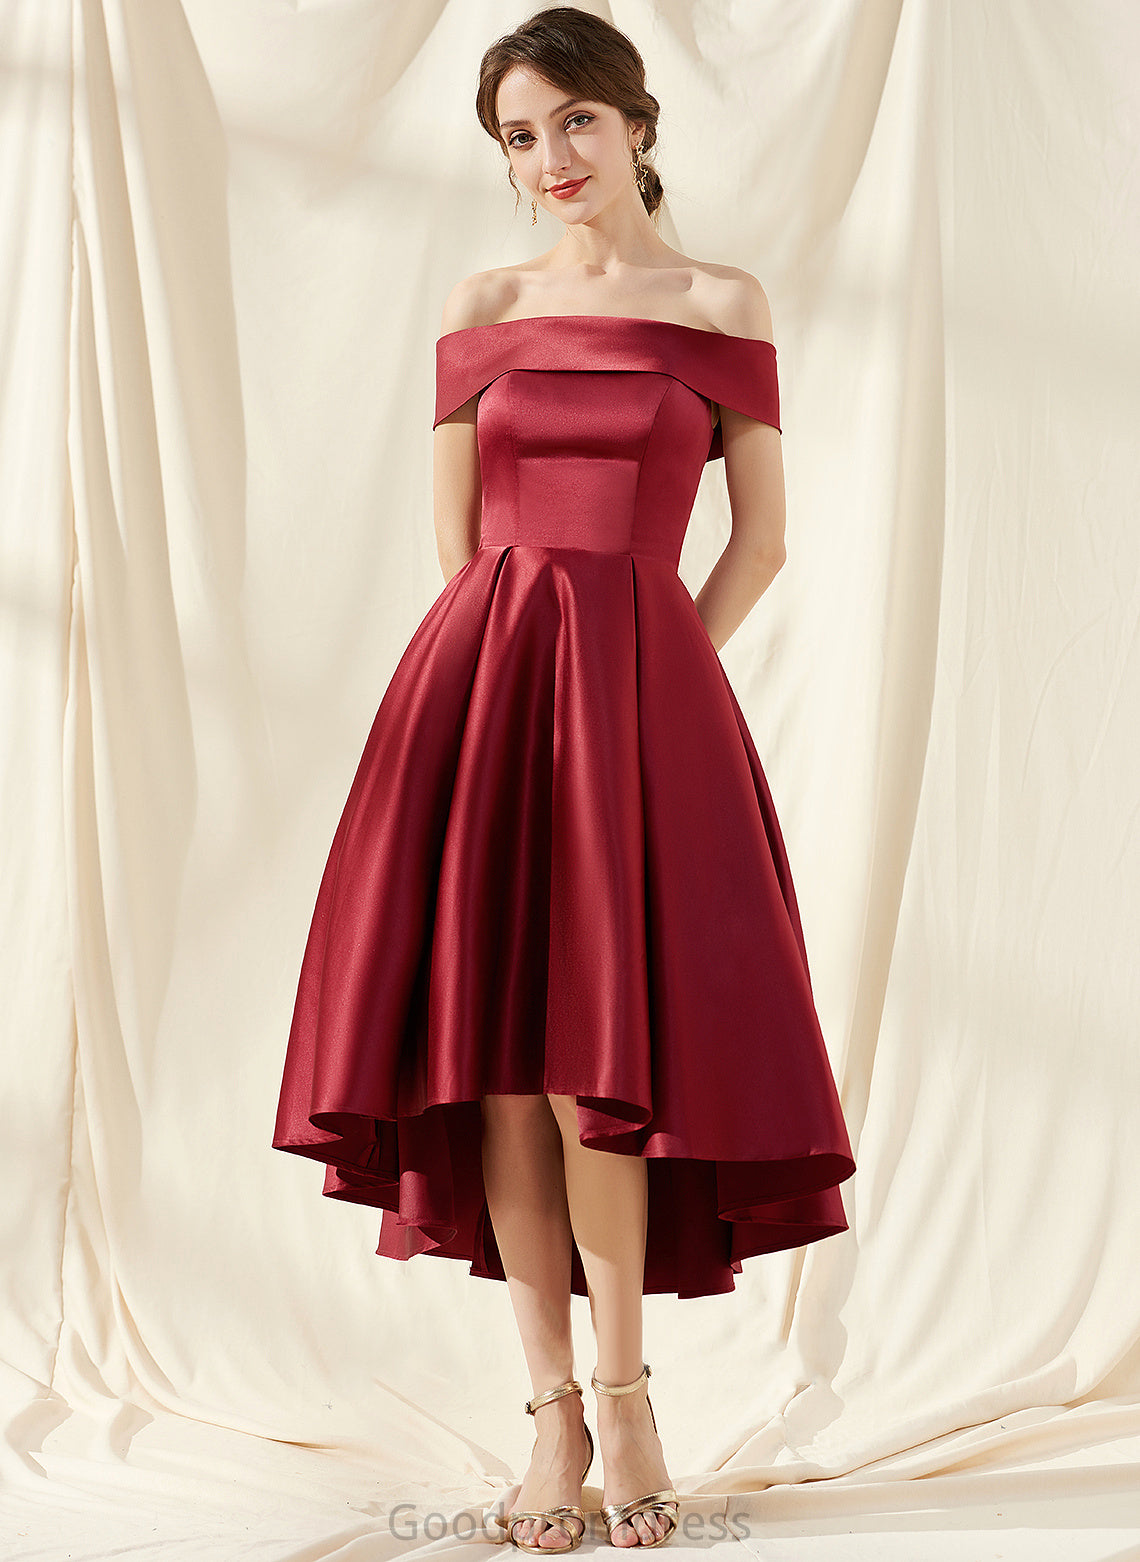 Dress Karli Asymmetrical Homecoming Dresses A-Line Pockets With Off-the-Shoulder Homecoming Satin